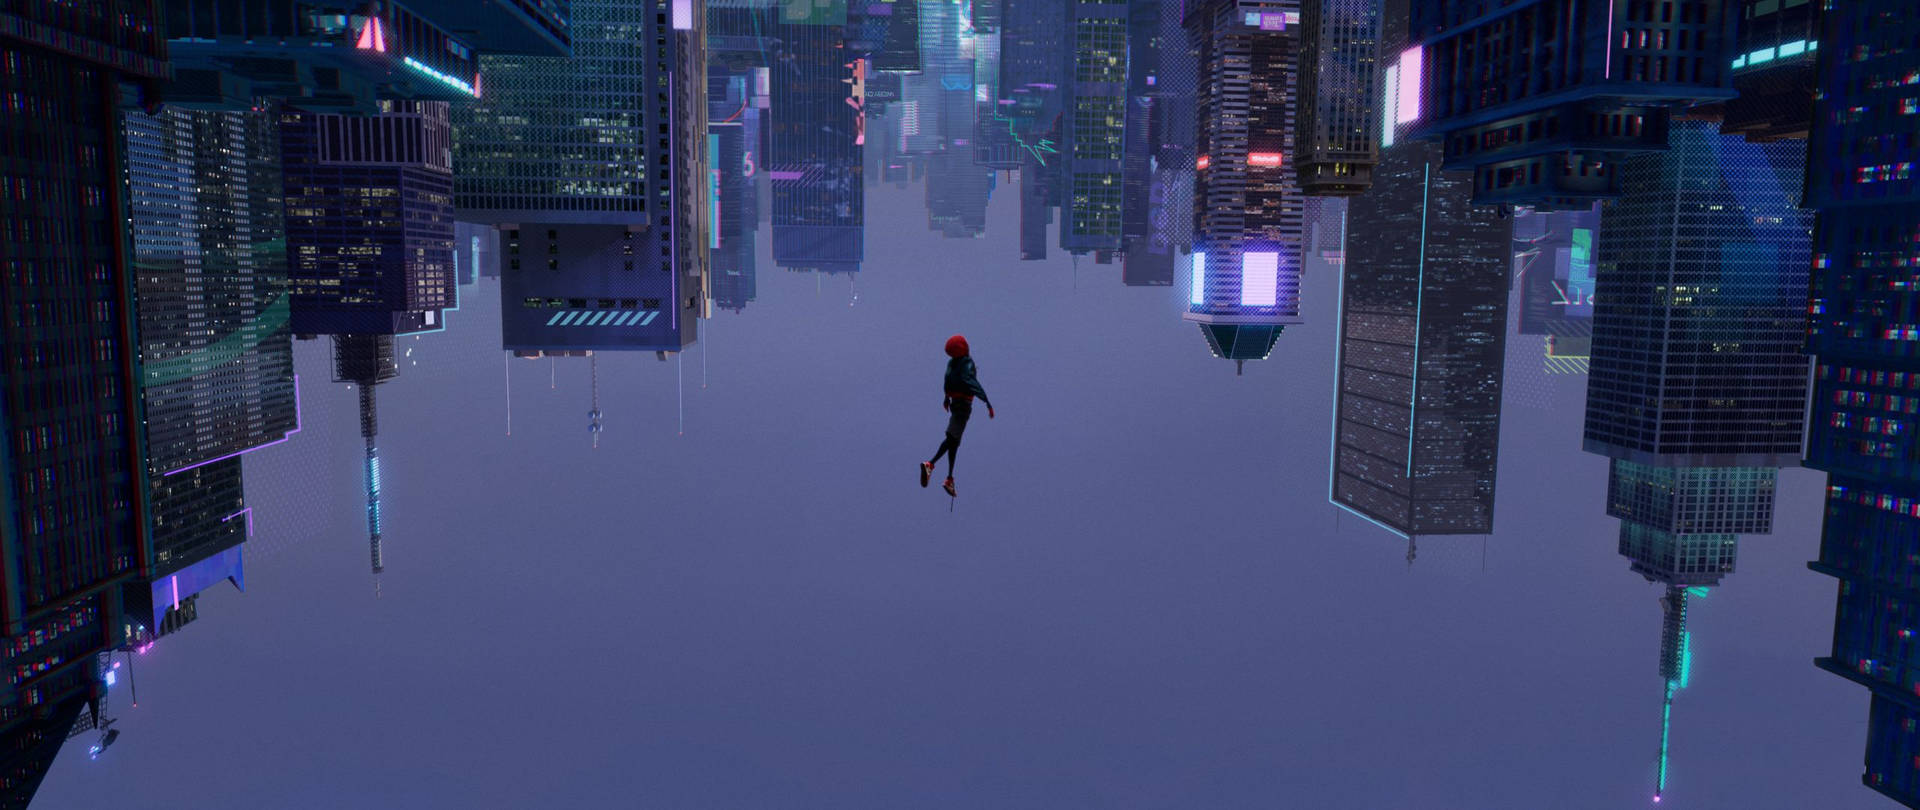 Spiderman freefalling into the abyss Wallpaper